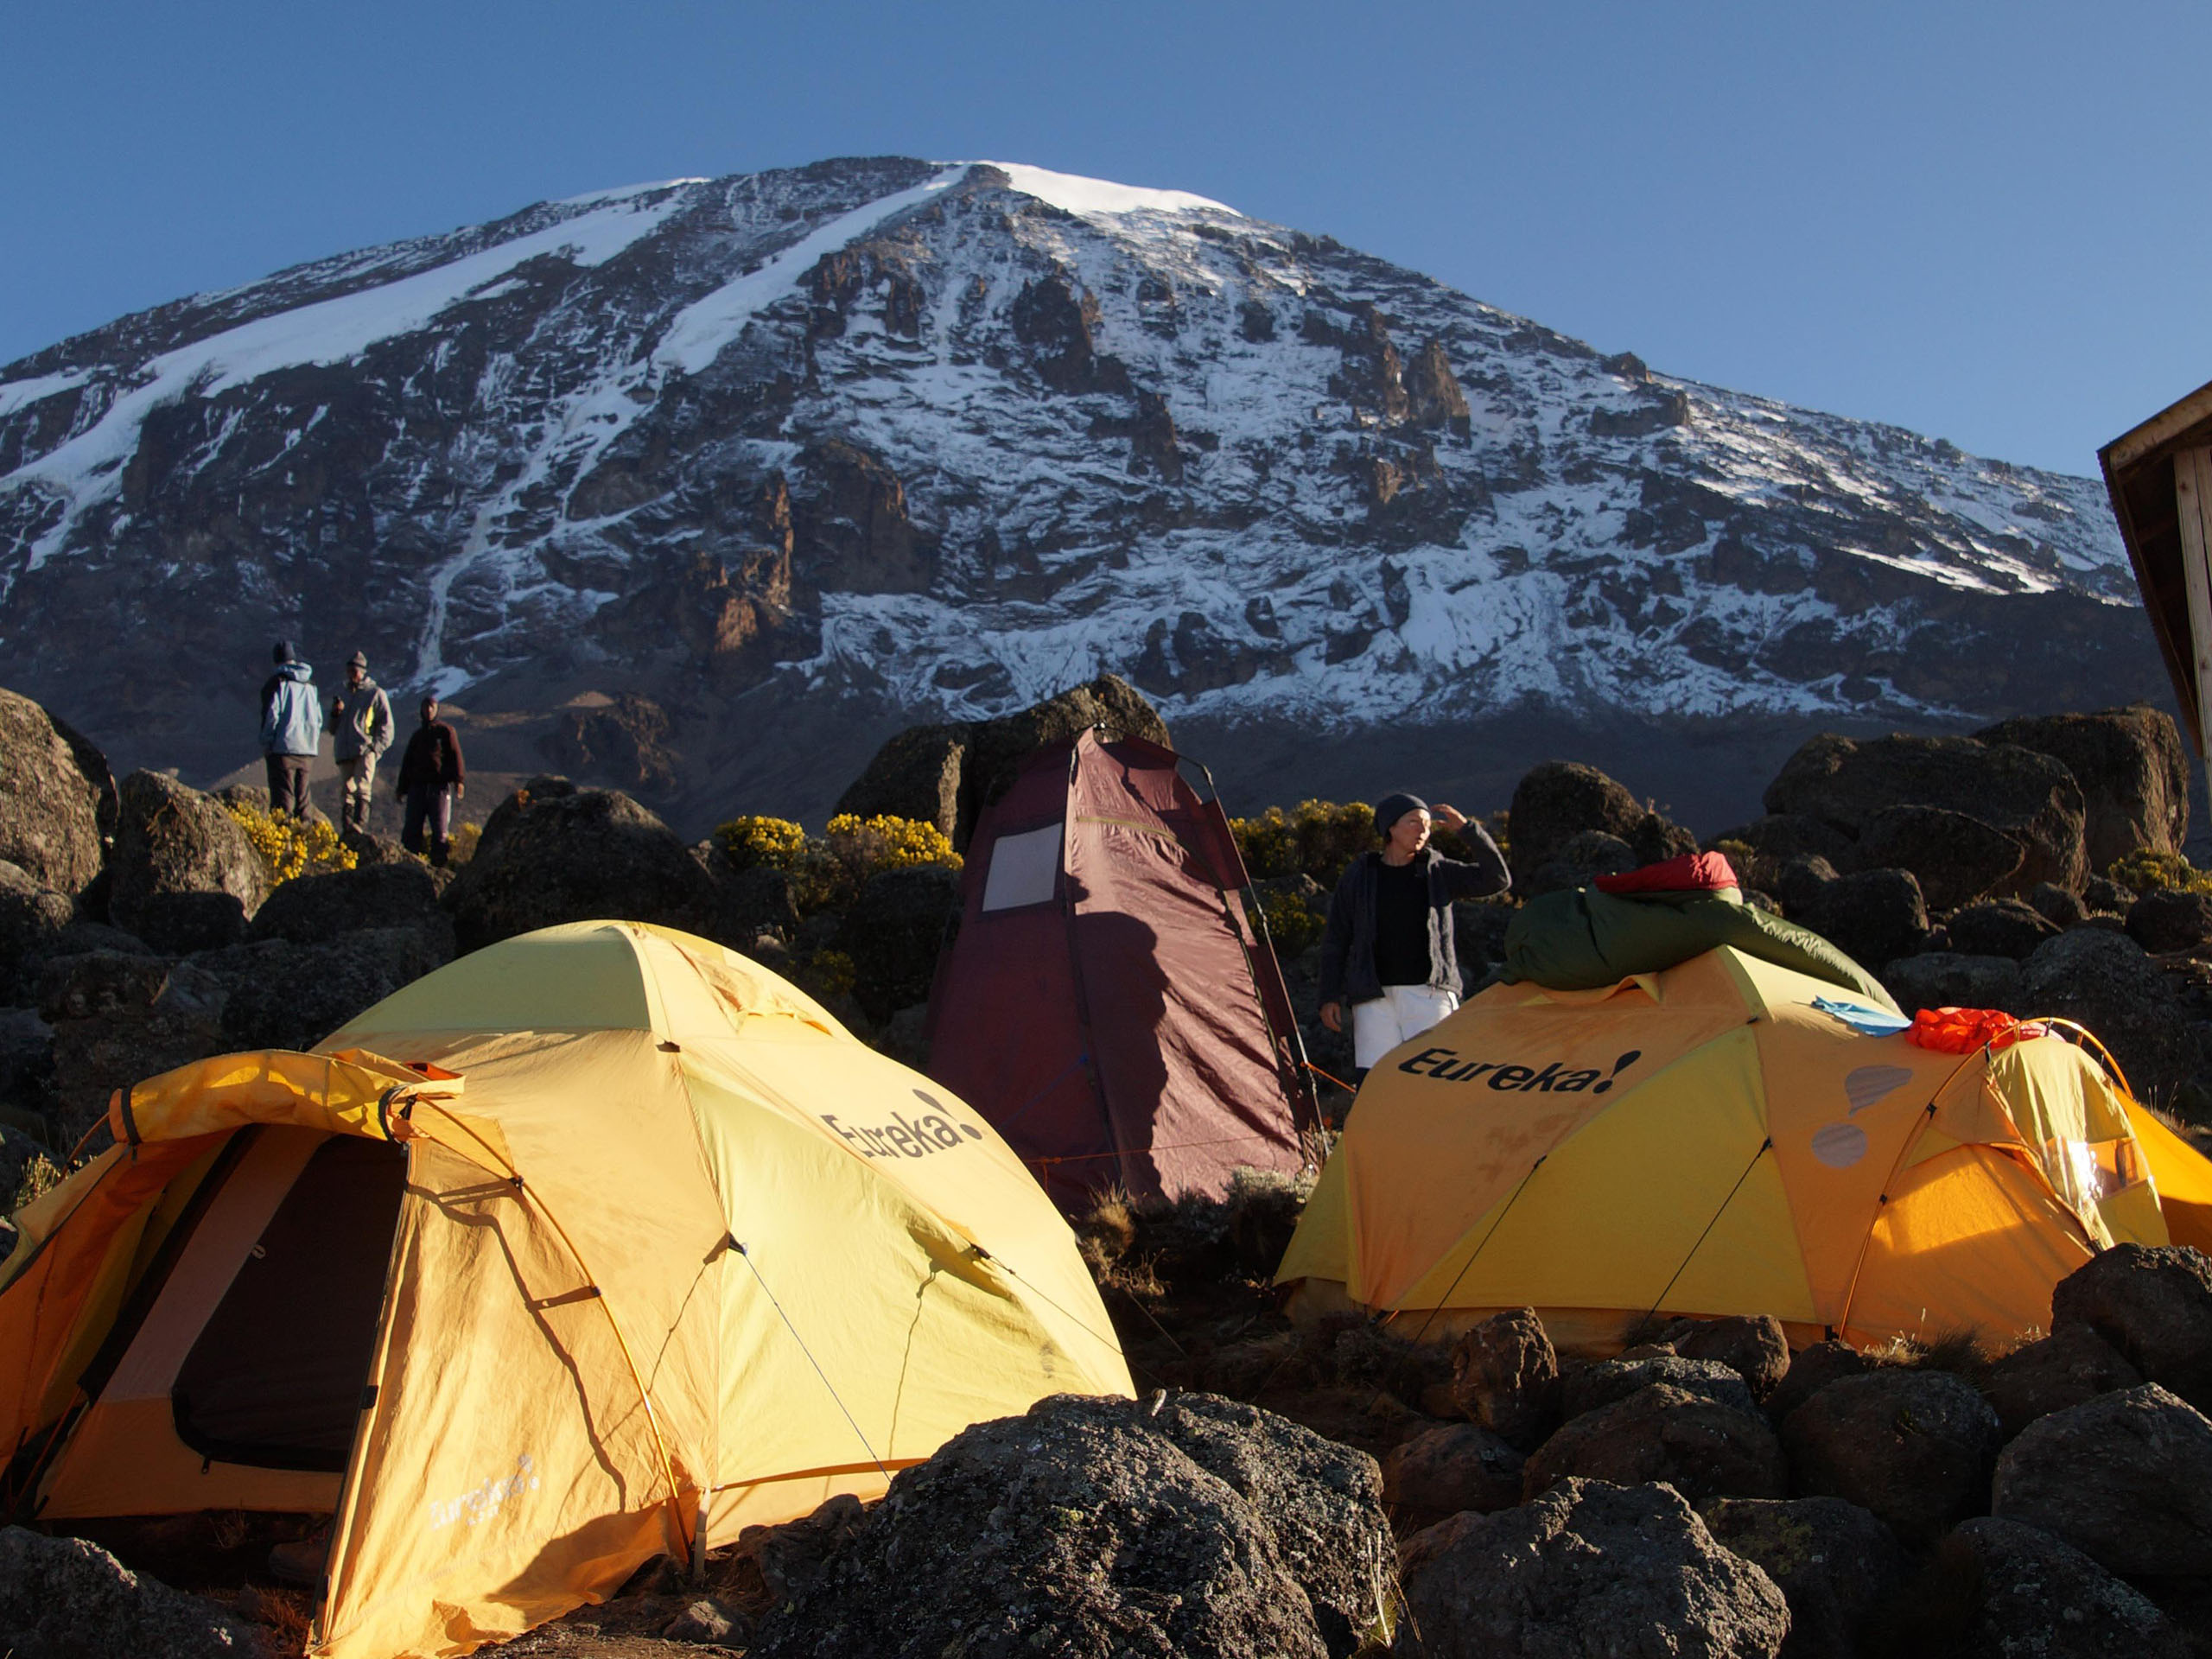 To climb Kilimanjaro you need to be capable camping outdoors for days